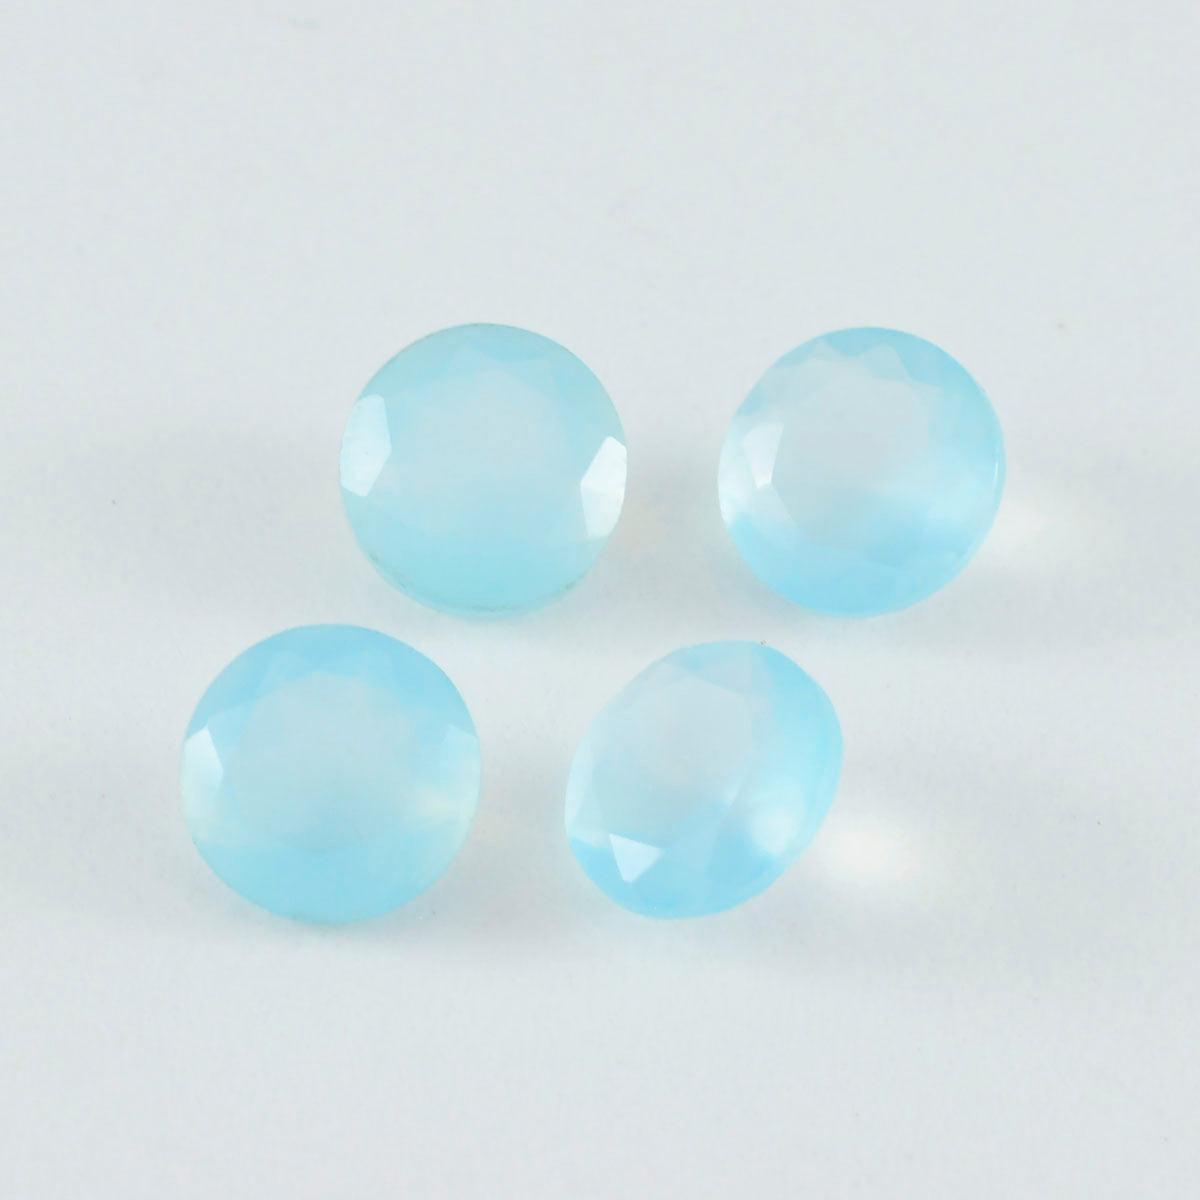 Riyogems 1PC Natural Aqua Chalcedony Faceted 8x8 mm Round Shape awesome Quality Loose Stone